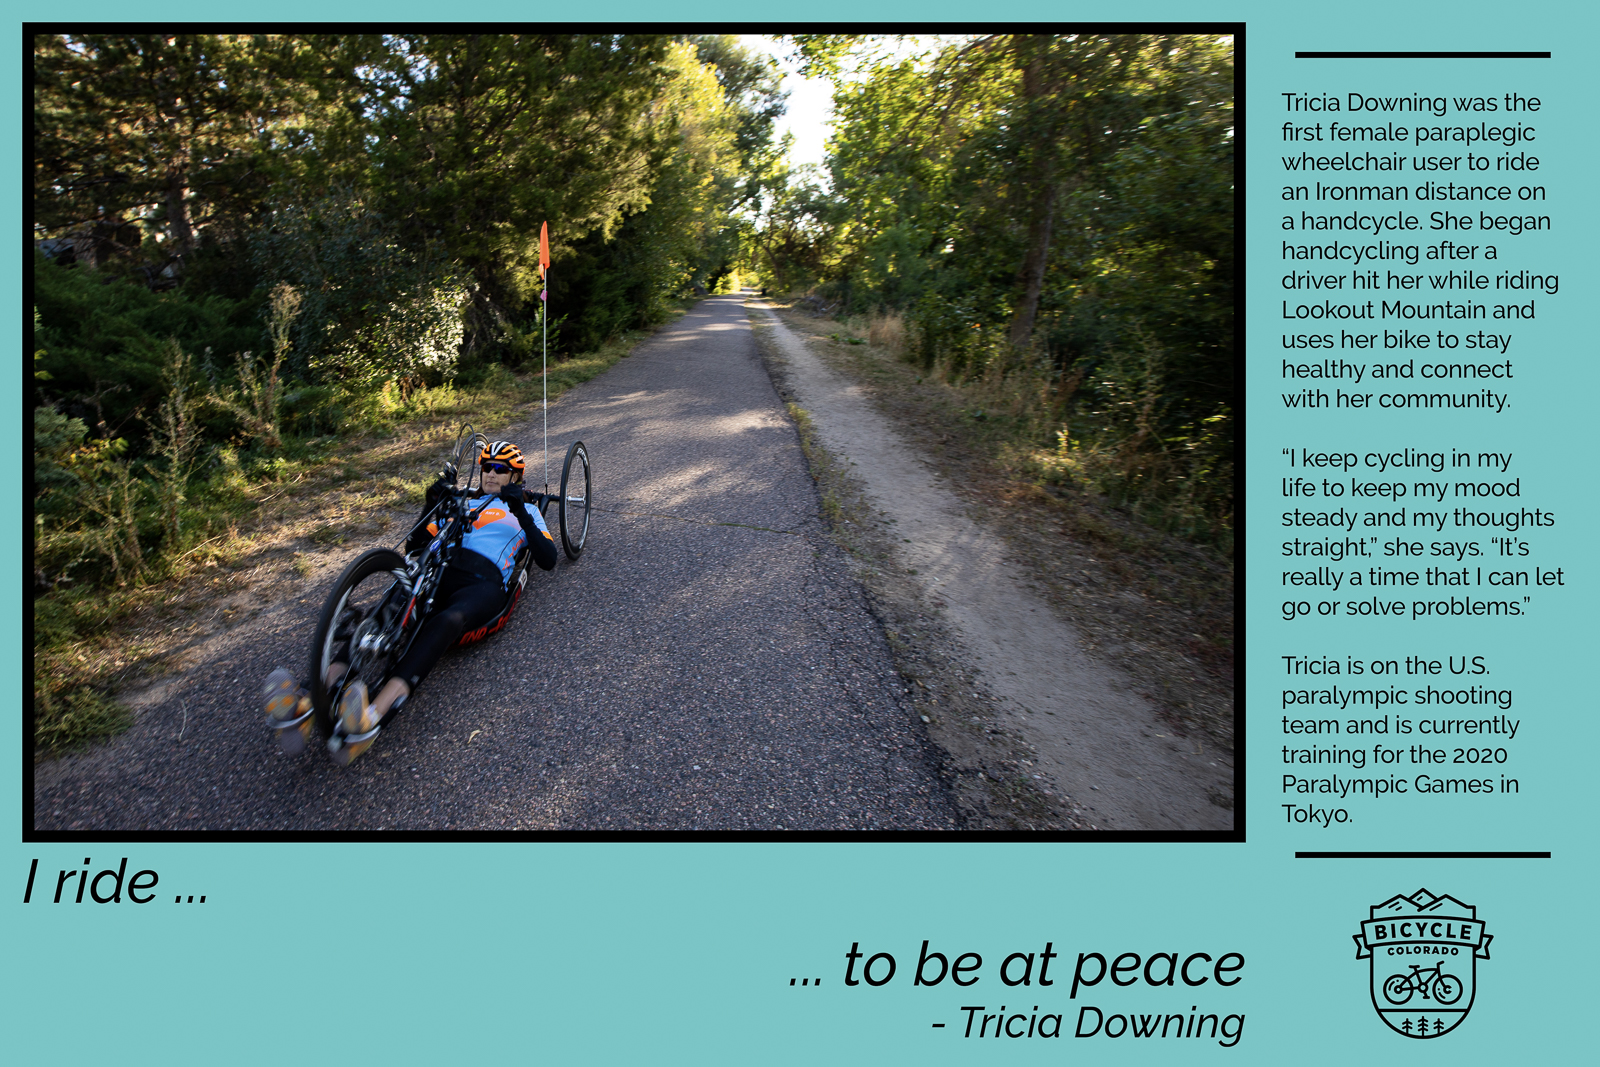 A "why I ride" graphic with Tricia Downing, an adaptive cyclist using a recumbent trike. Text reads "I ride to be at peace. Tricia Downing was the first female paraplegic wheelchair user to ride an Ironman distance on a handcycle. She began handcycling after a driver hit her while riding Lookout Mountain and uses her bike to stay healthy and connect with her community. "I keep cycling in my life to keep my mood steady and my thoughts straight," she says. "It's really a time that I can let go or solve problems." Tricia is on the U.S. paralympic shooting team and is currently training for the 2020 Paralympic Games in Tokyo."